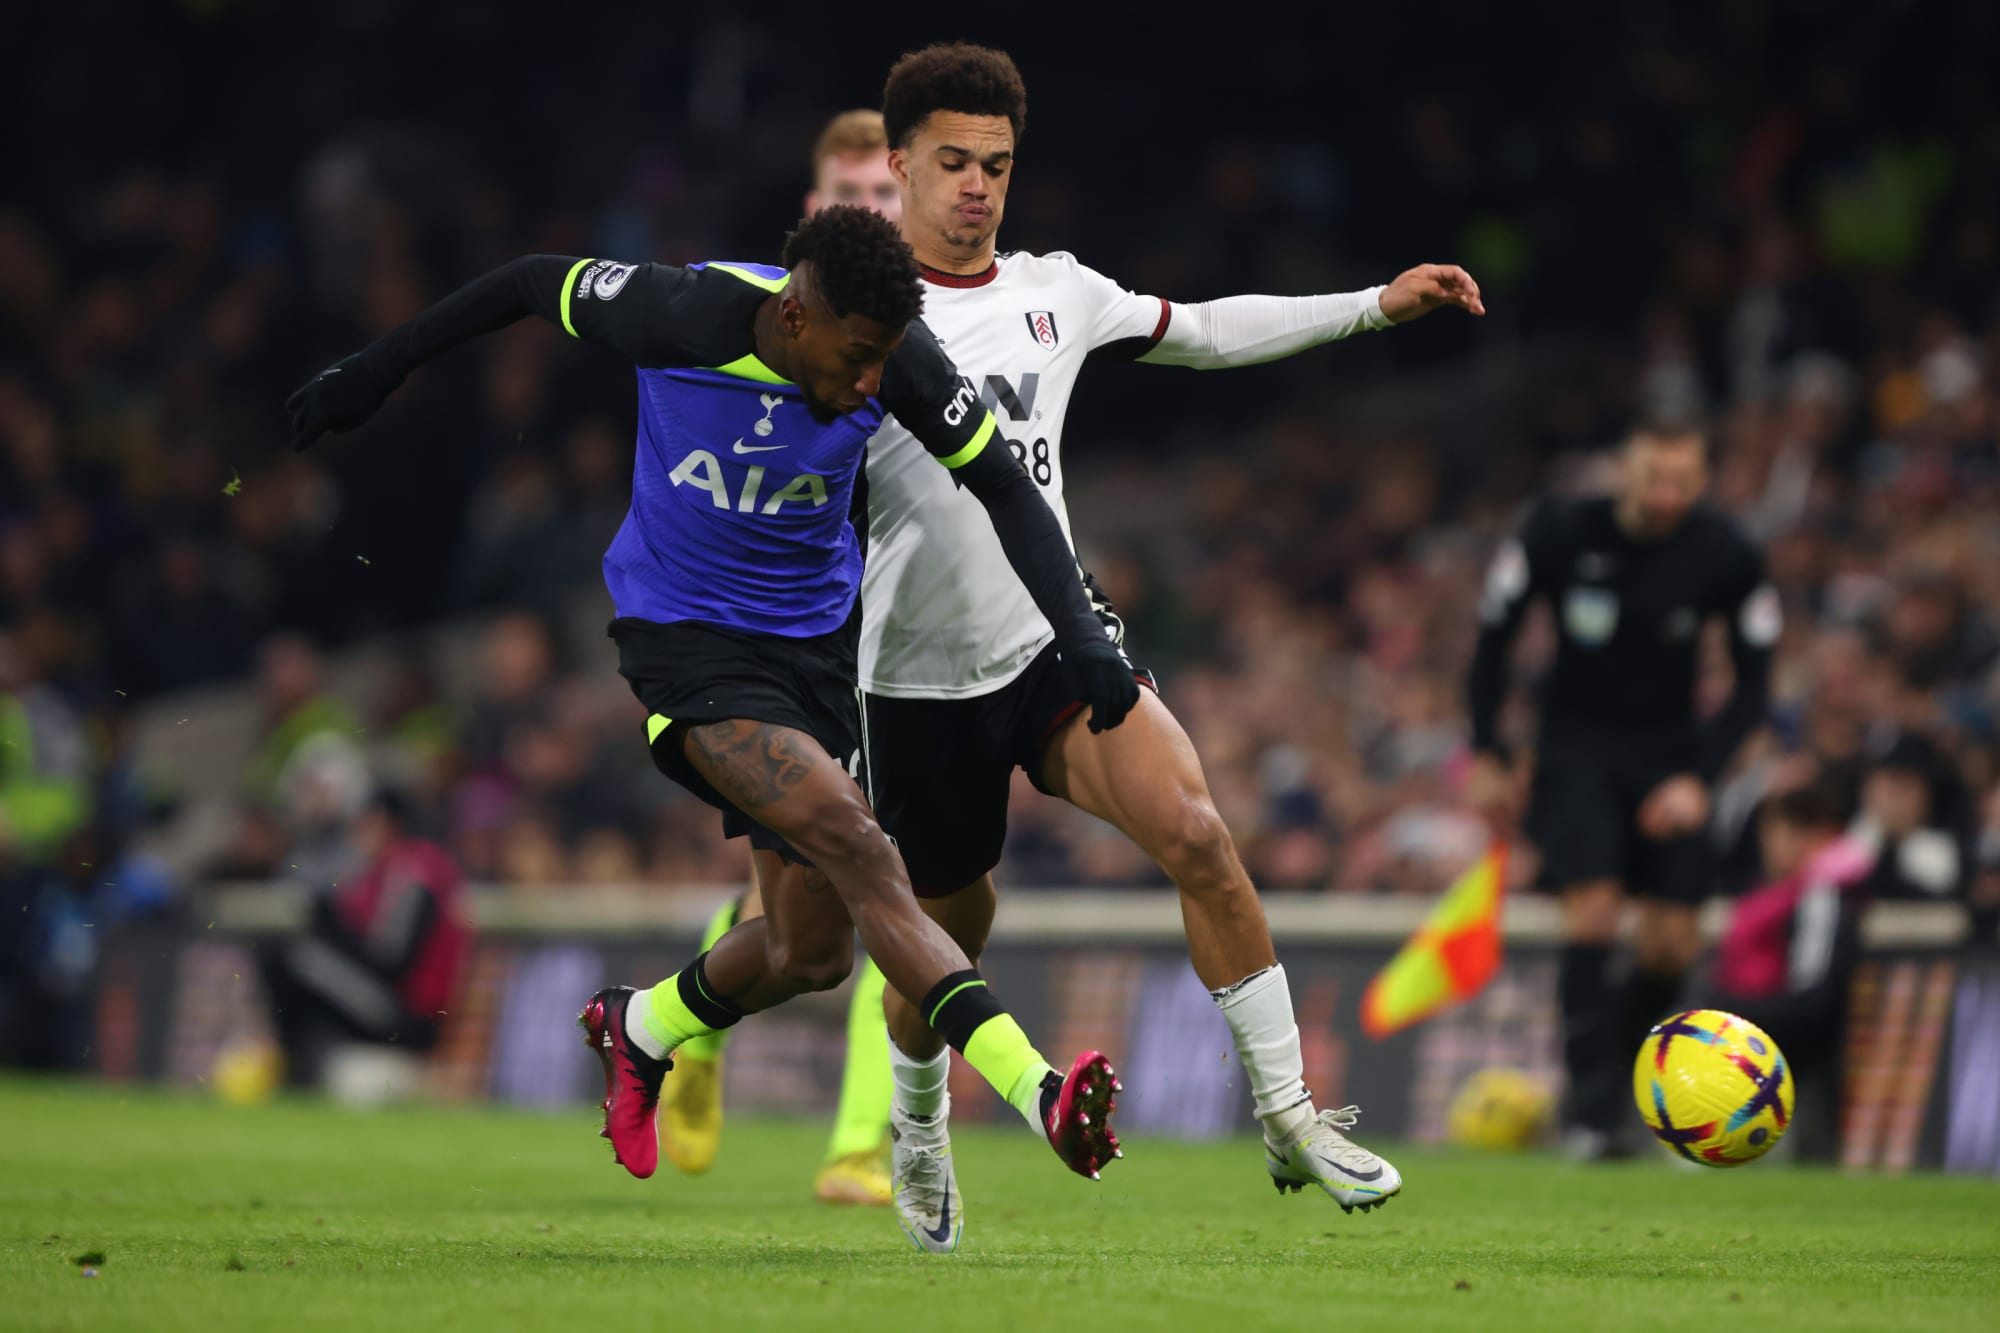 Tottenham Hotspur adds small tactical twist in win over Fulham